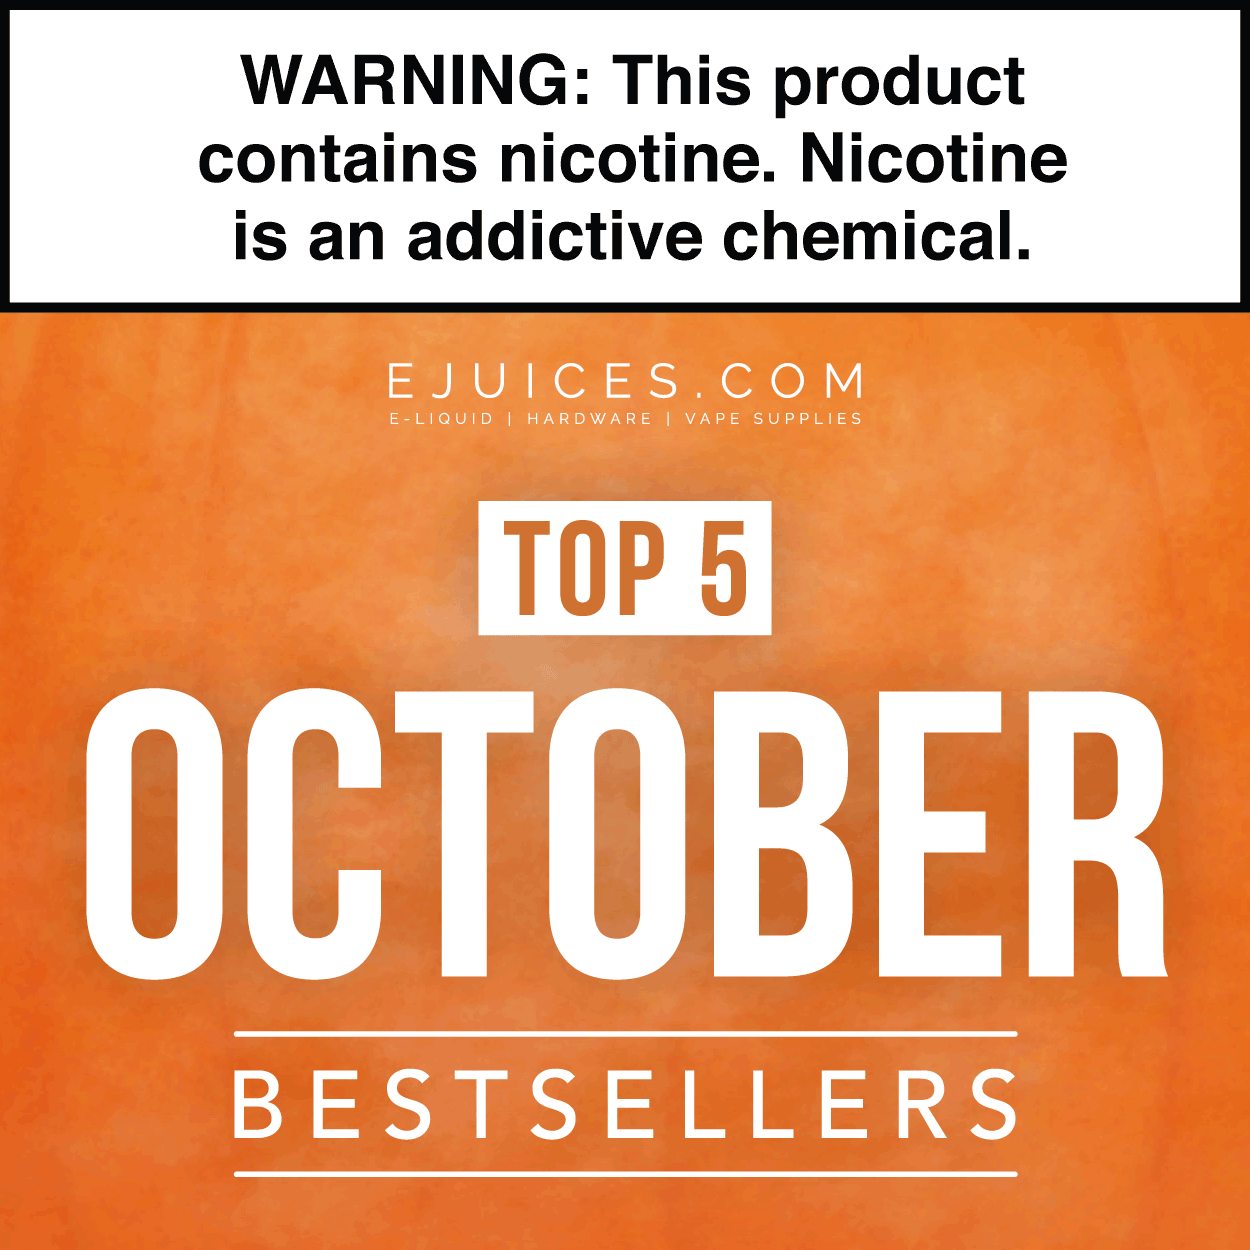 Top 5 Products for October 2020